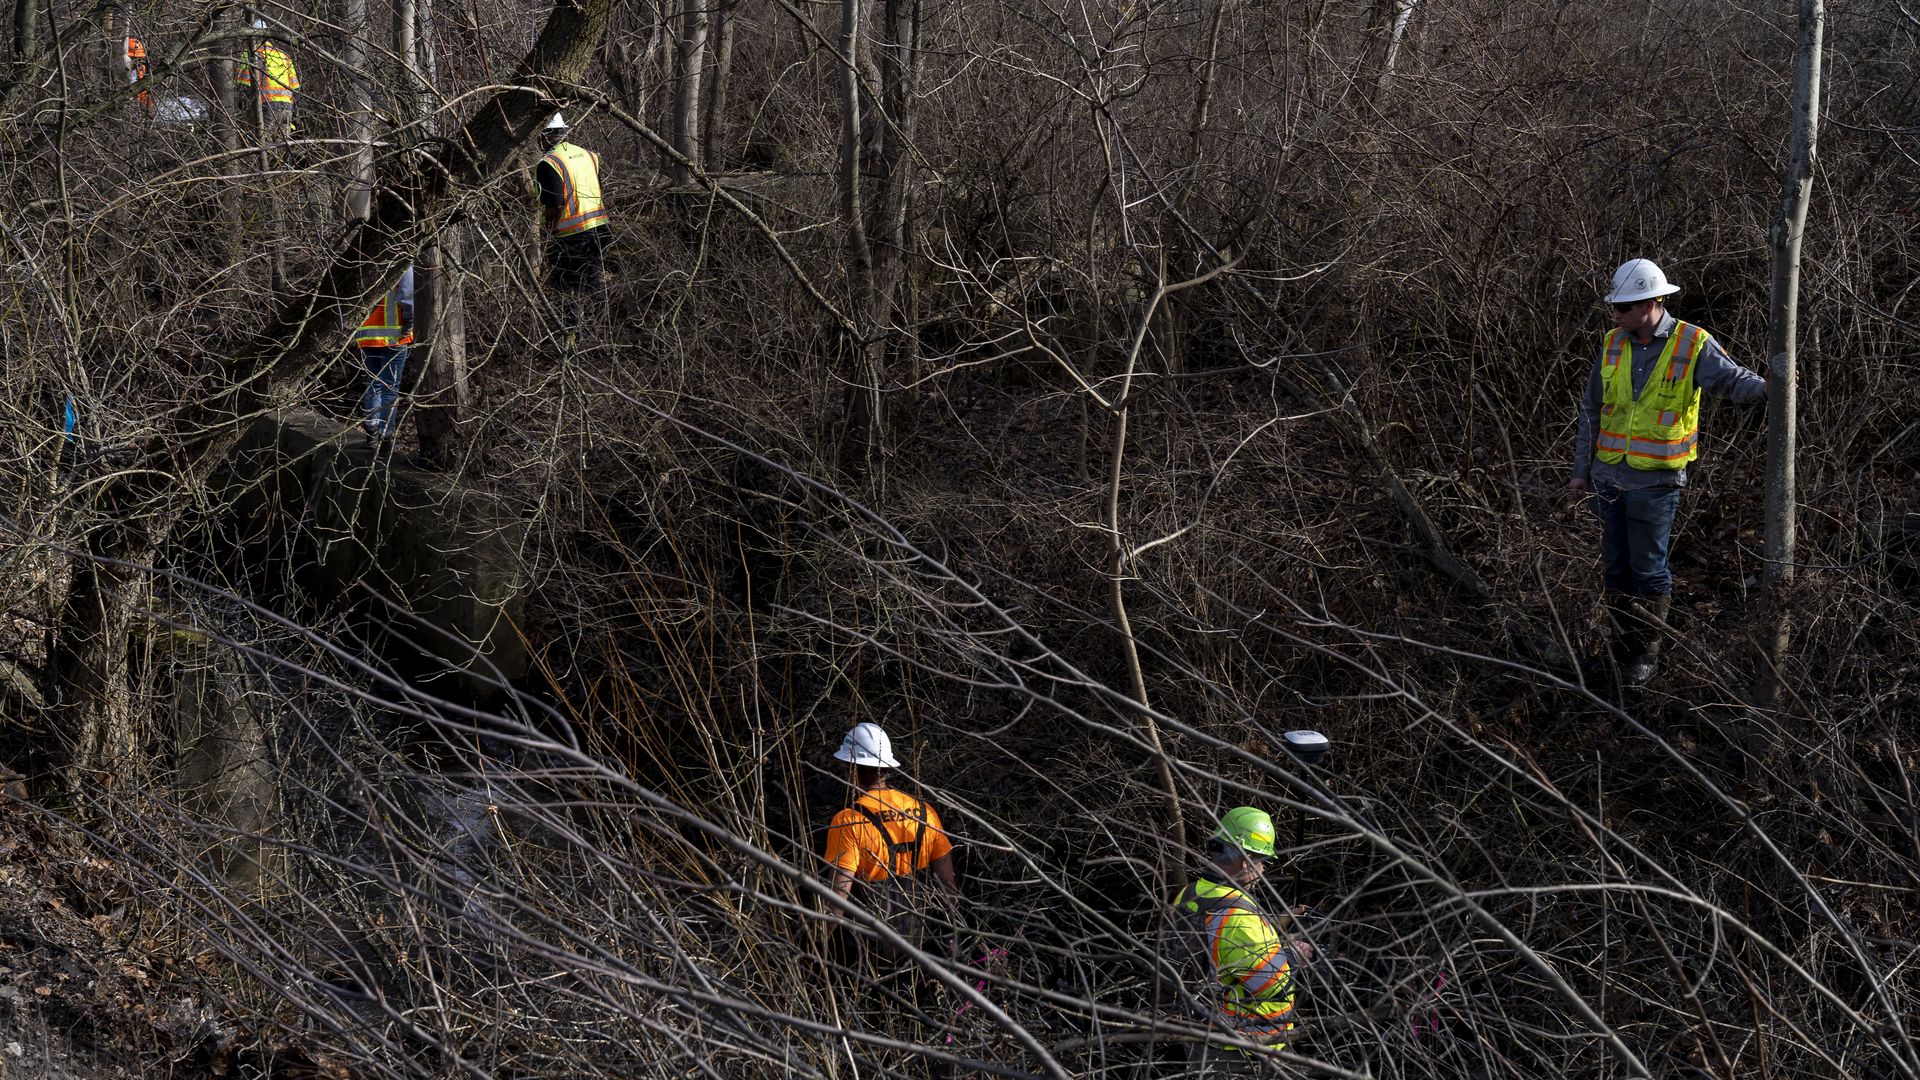 Ohio EPA and other clean-up crews work in Sulphur Run creek on February 23, 2023 in East Palestine, Ohio